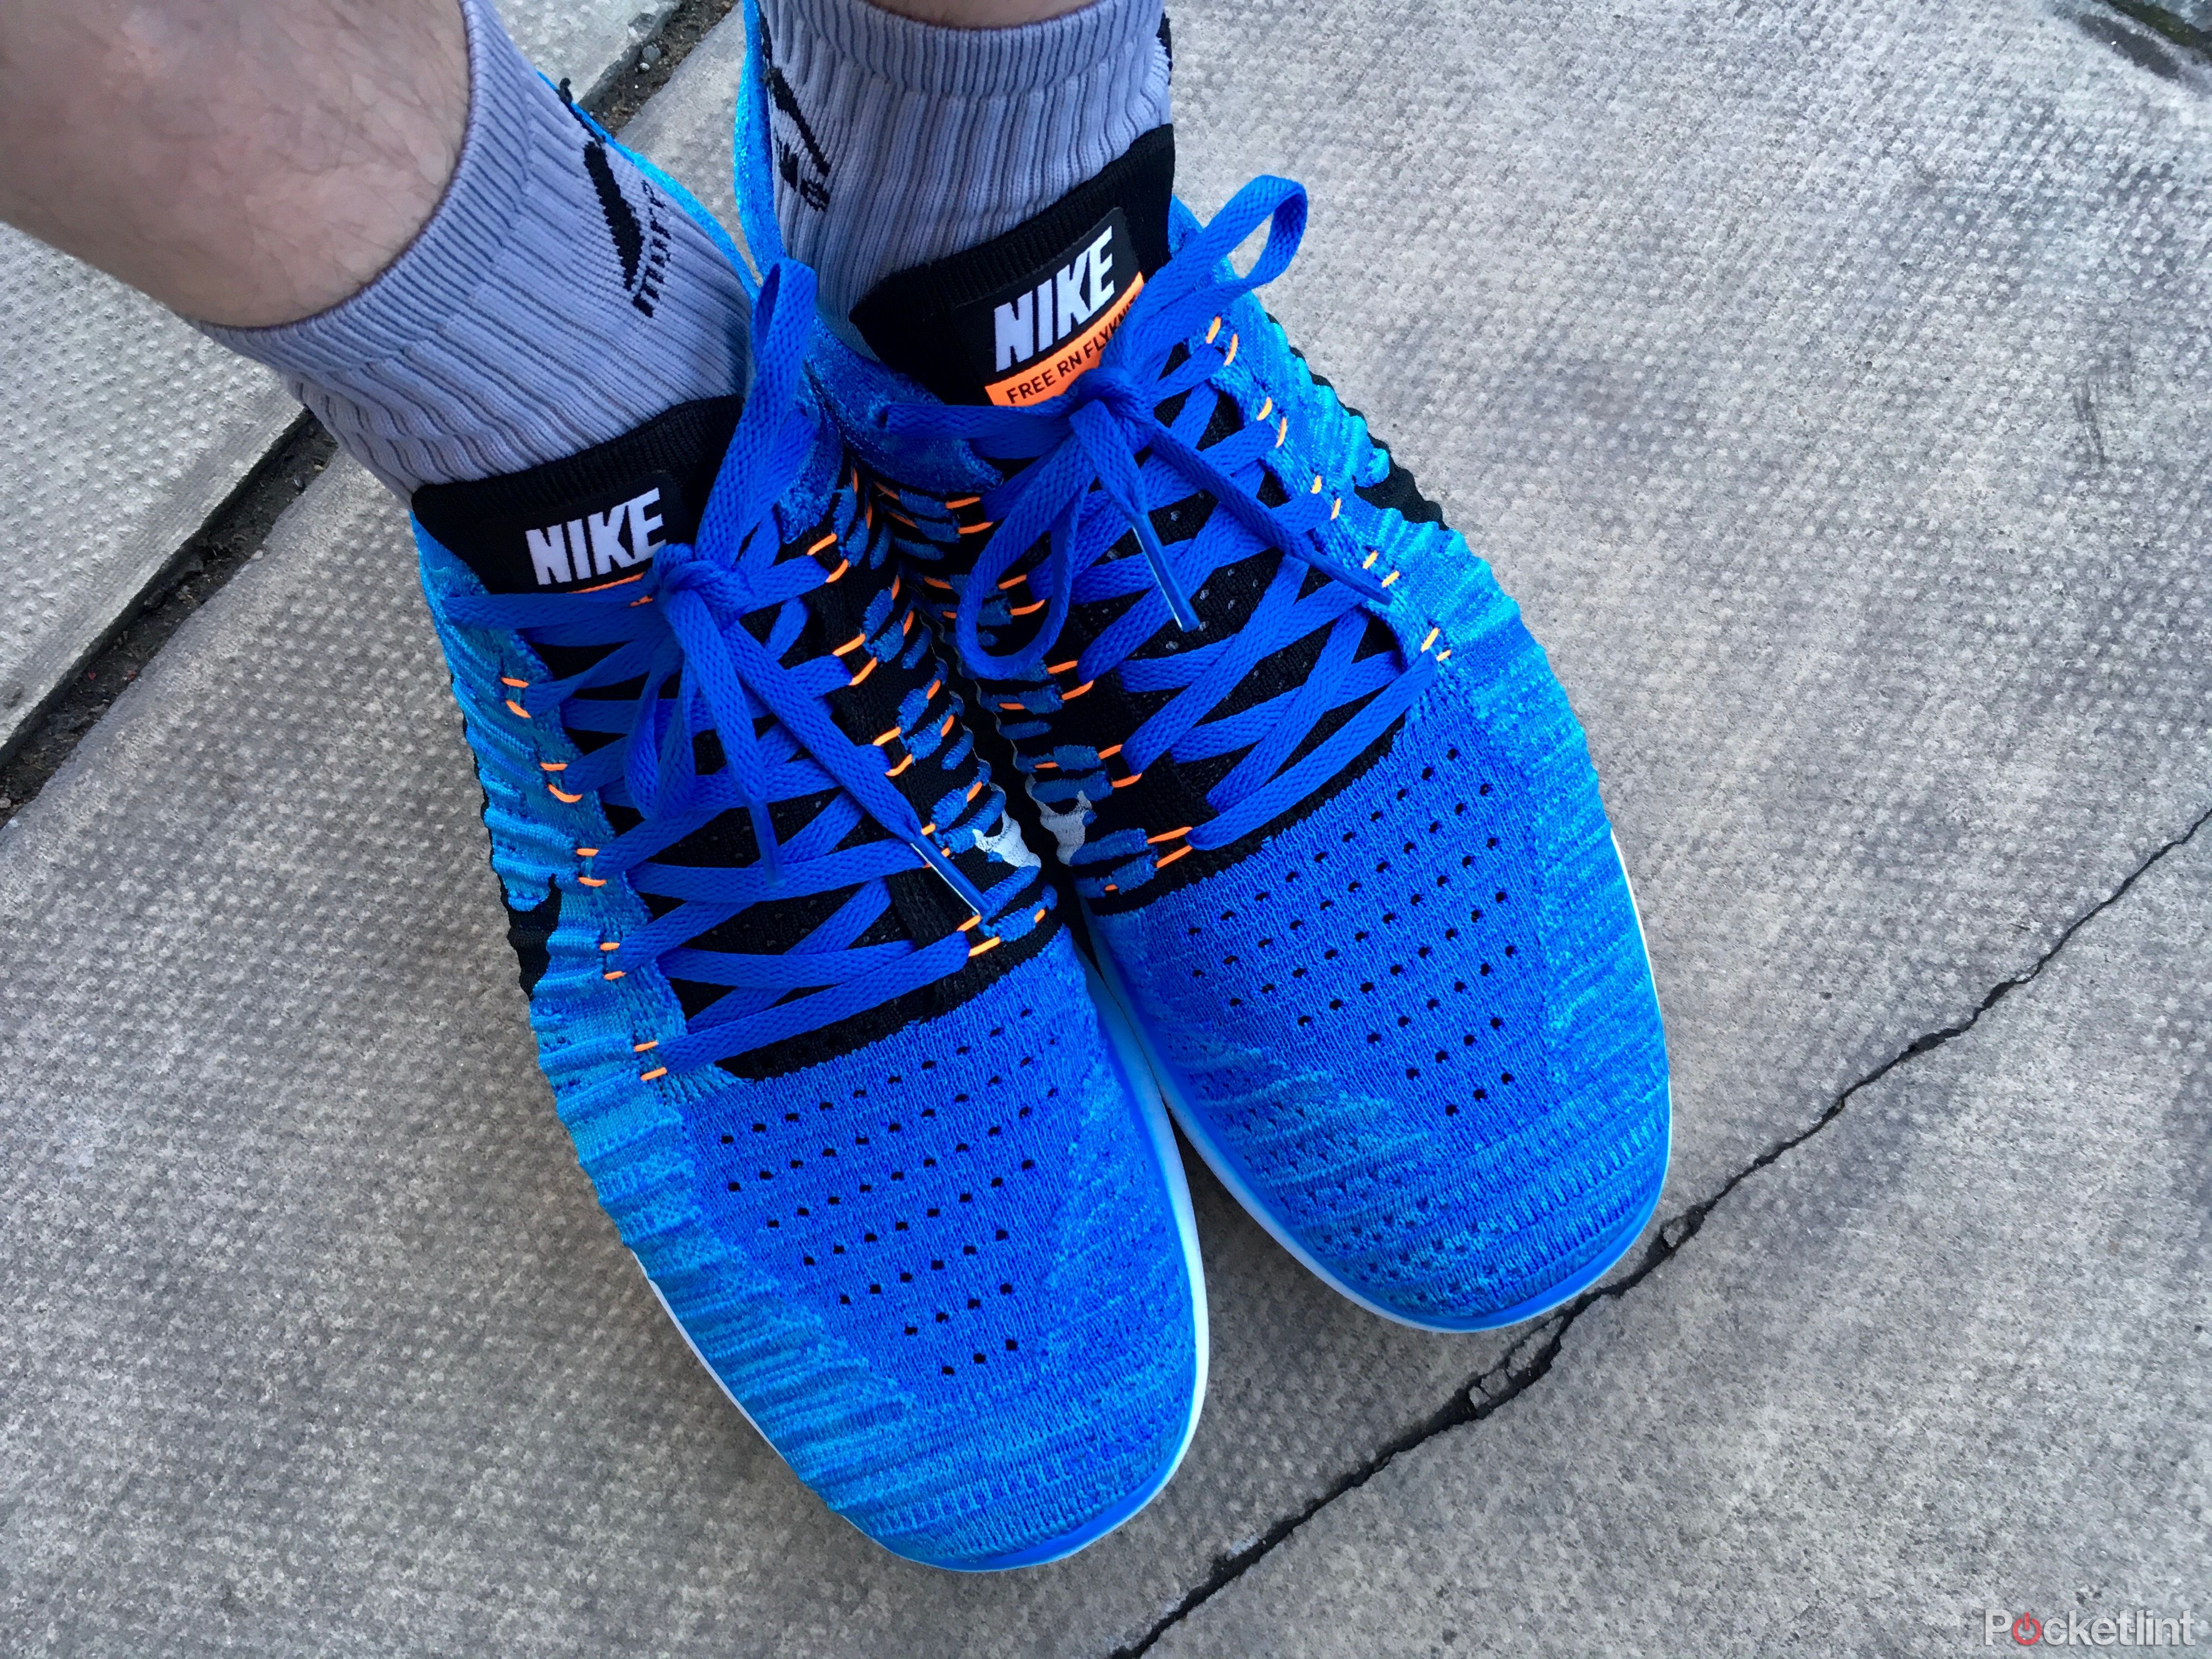 Conquista Familiar ellos Nike Free RN Motion Flyknit sport new tech to deliver a more natural run